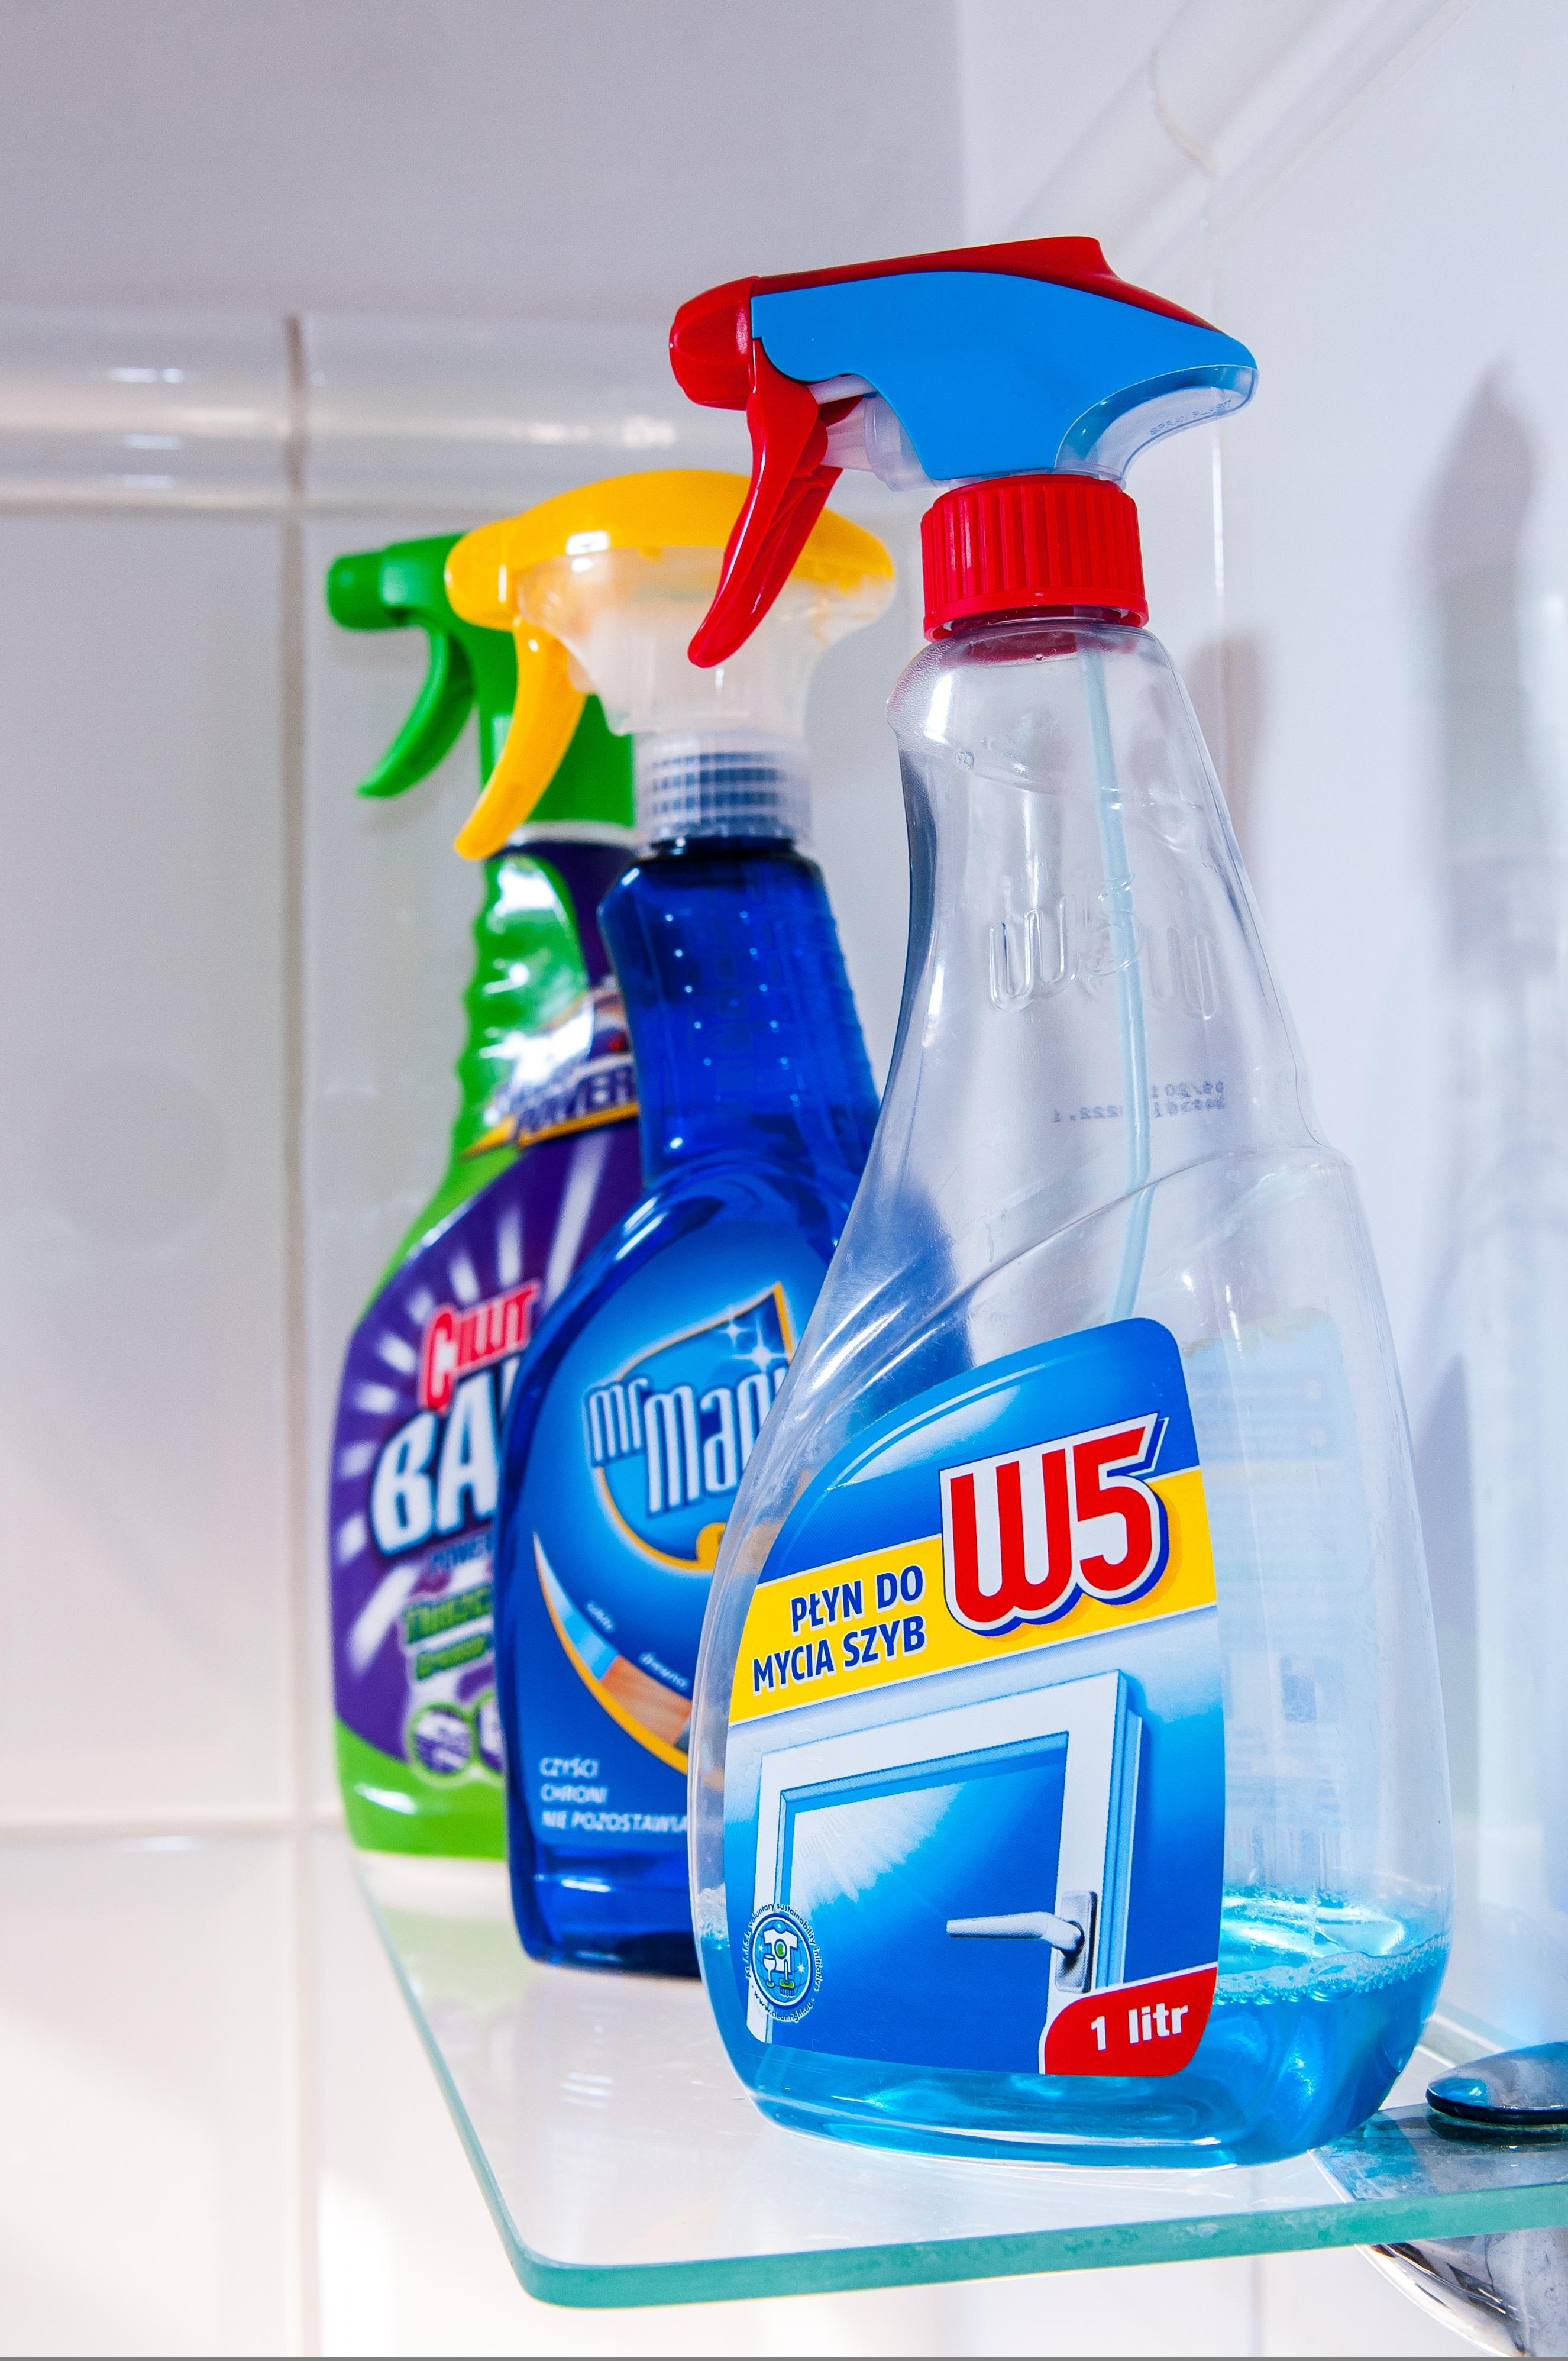 professional cleaning sprays and supplies needed for home cleaning